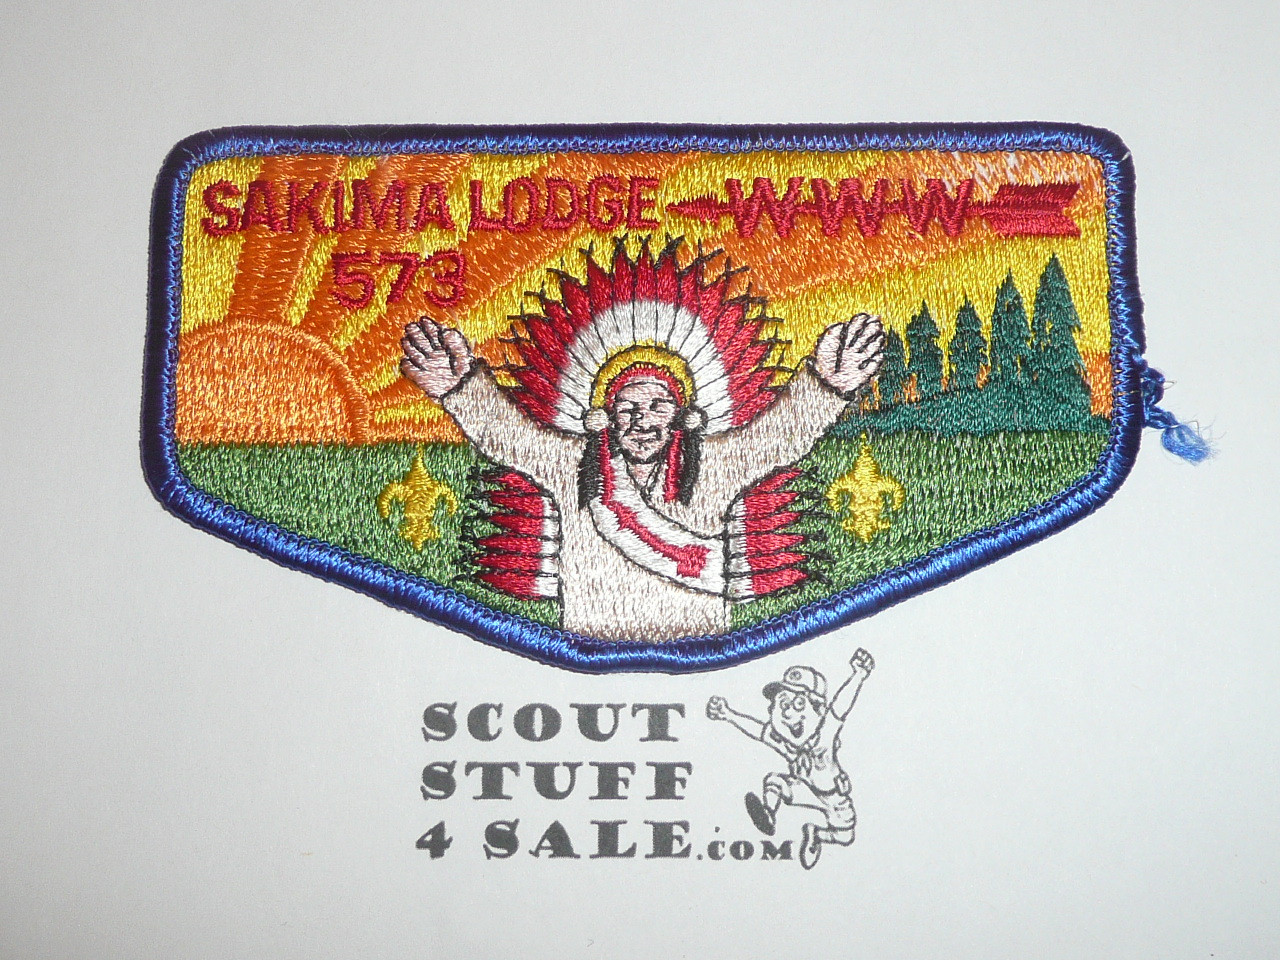 Order of the Arrow Lodge #573 Sakima S12 Flap Patch